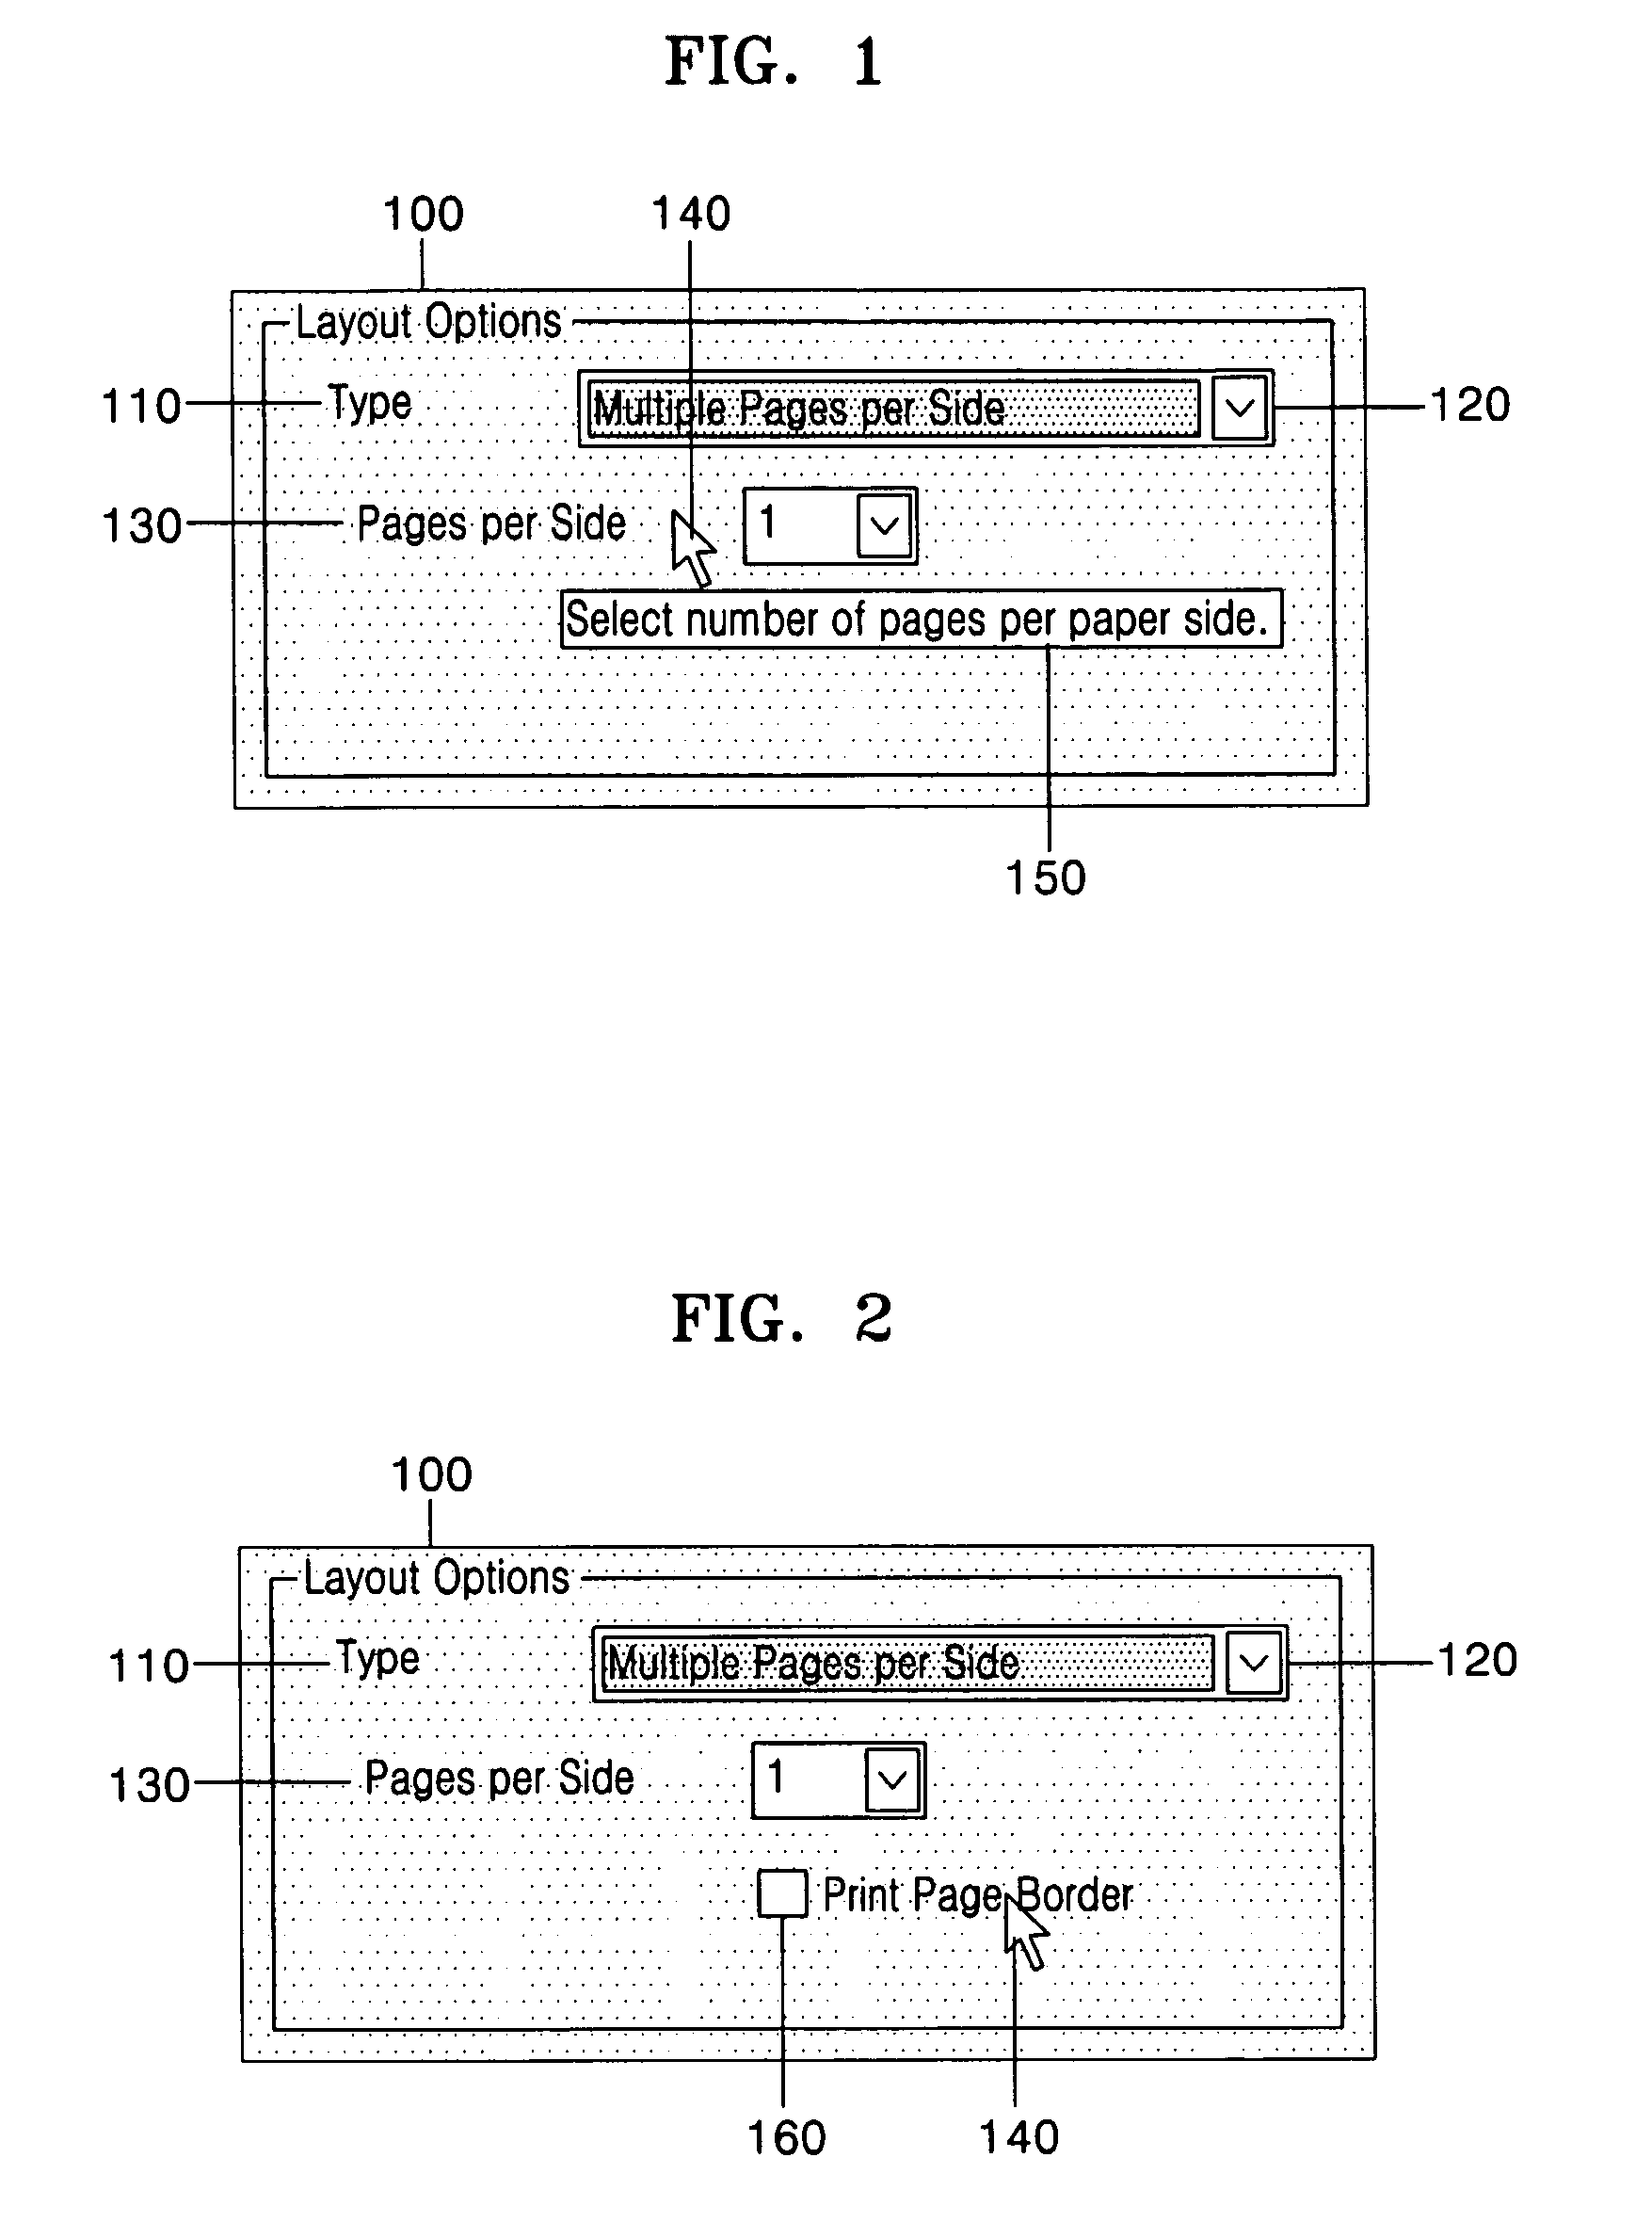 Apparatus and method for adaptively generating tooltip